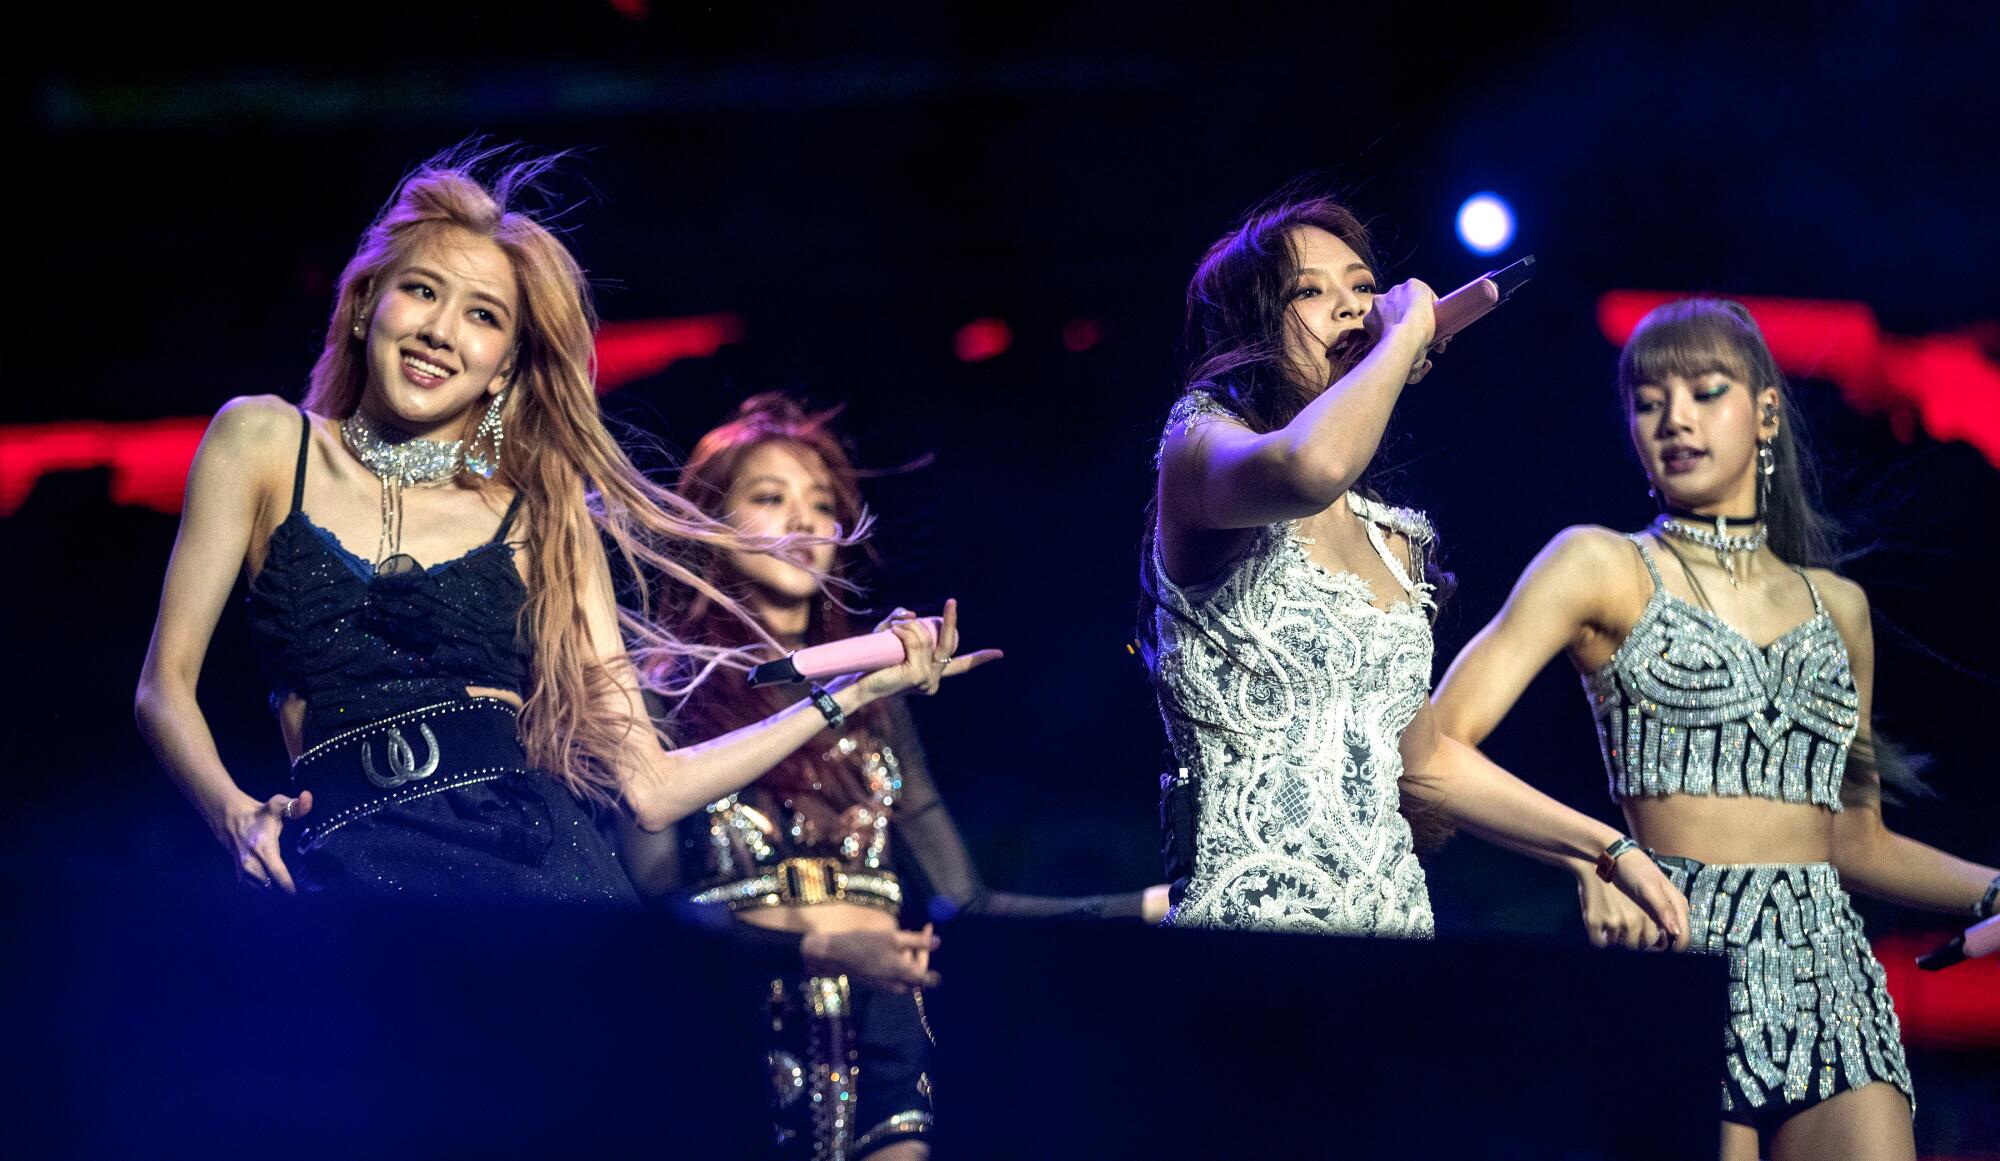 A female K-pop foursome performs onstage